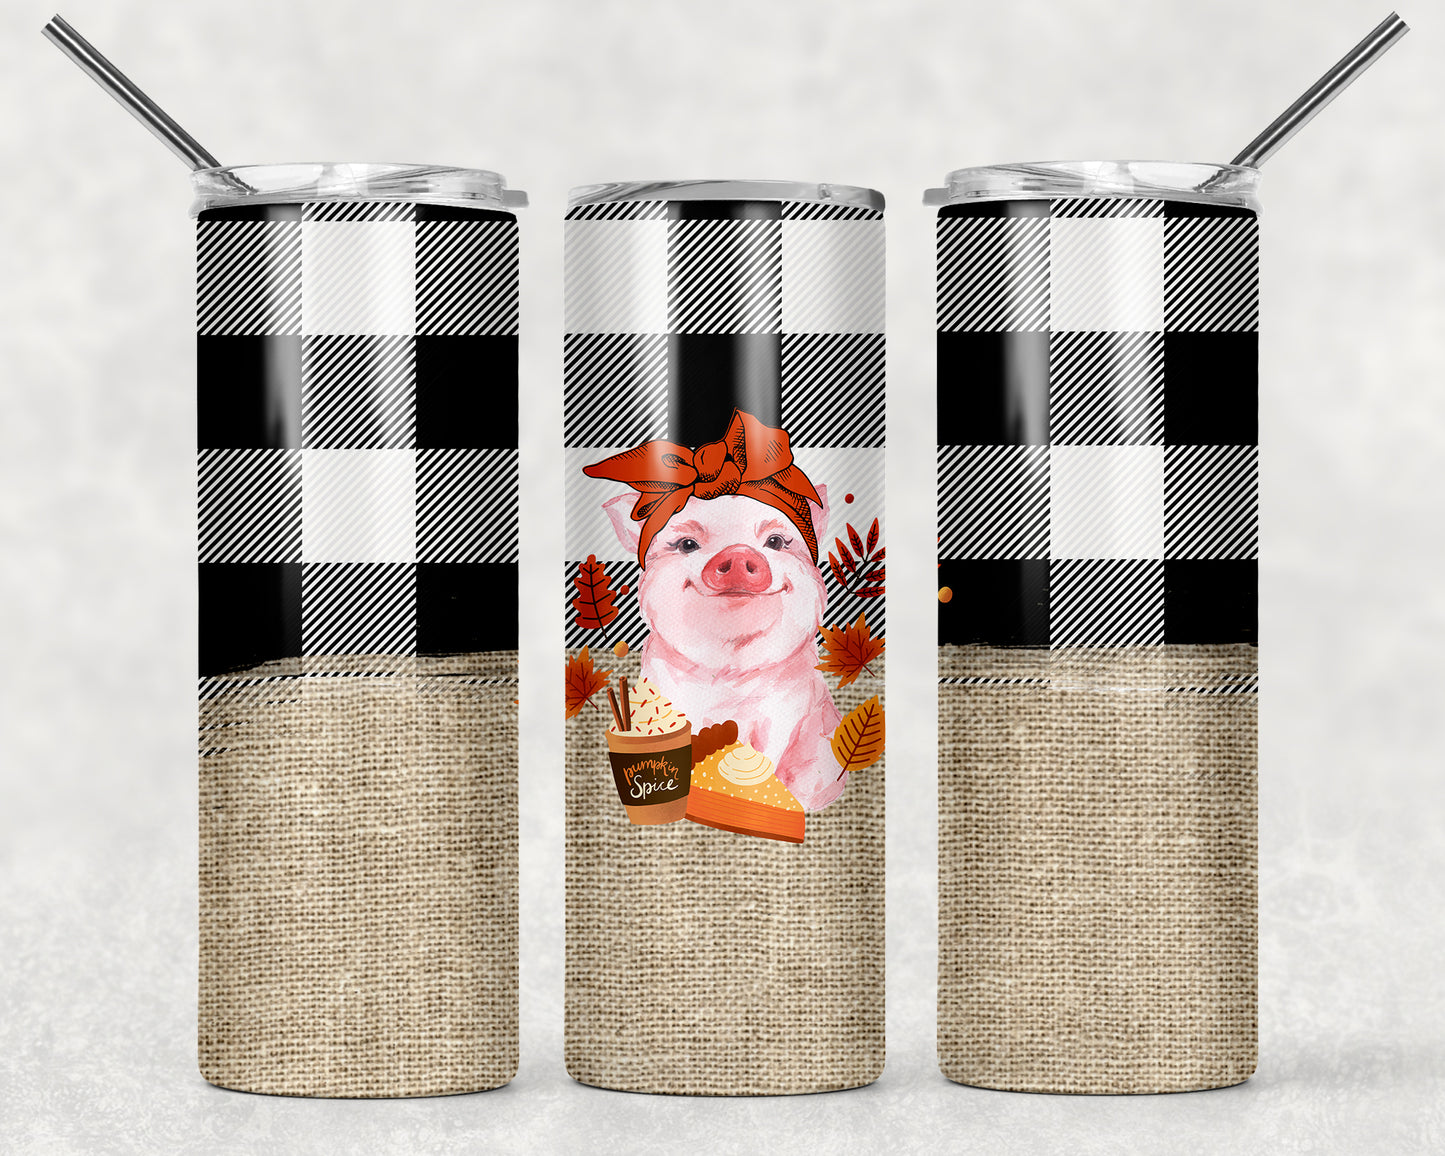 Cute Pig with Buffalo Plaid Tumbler, 20oz Tumblr, Hot or Cold Beverage Holder